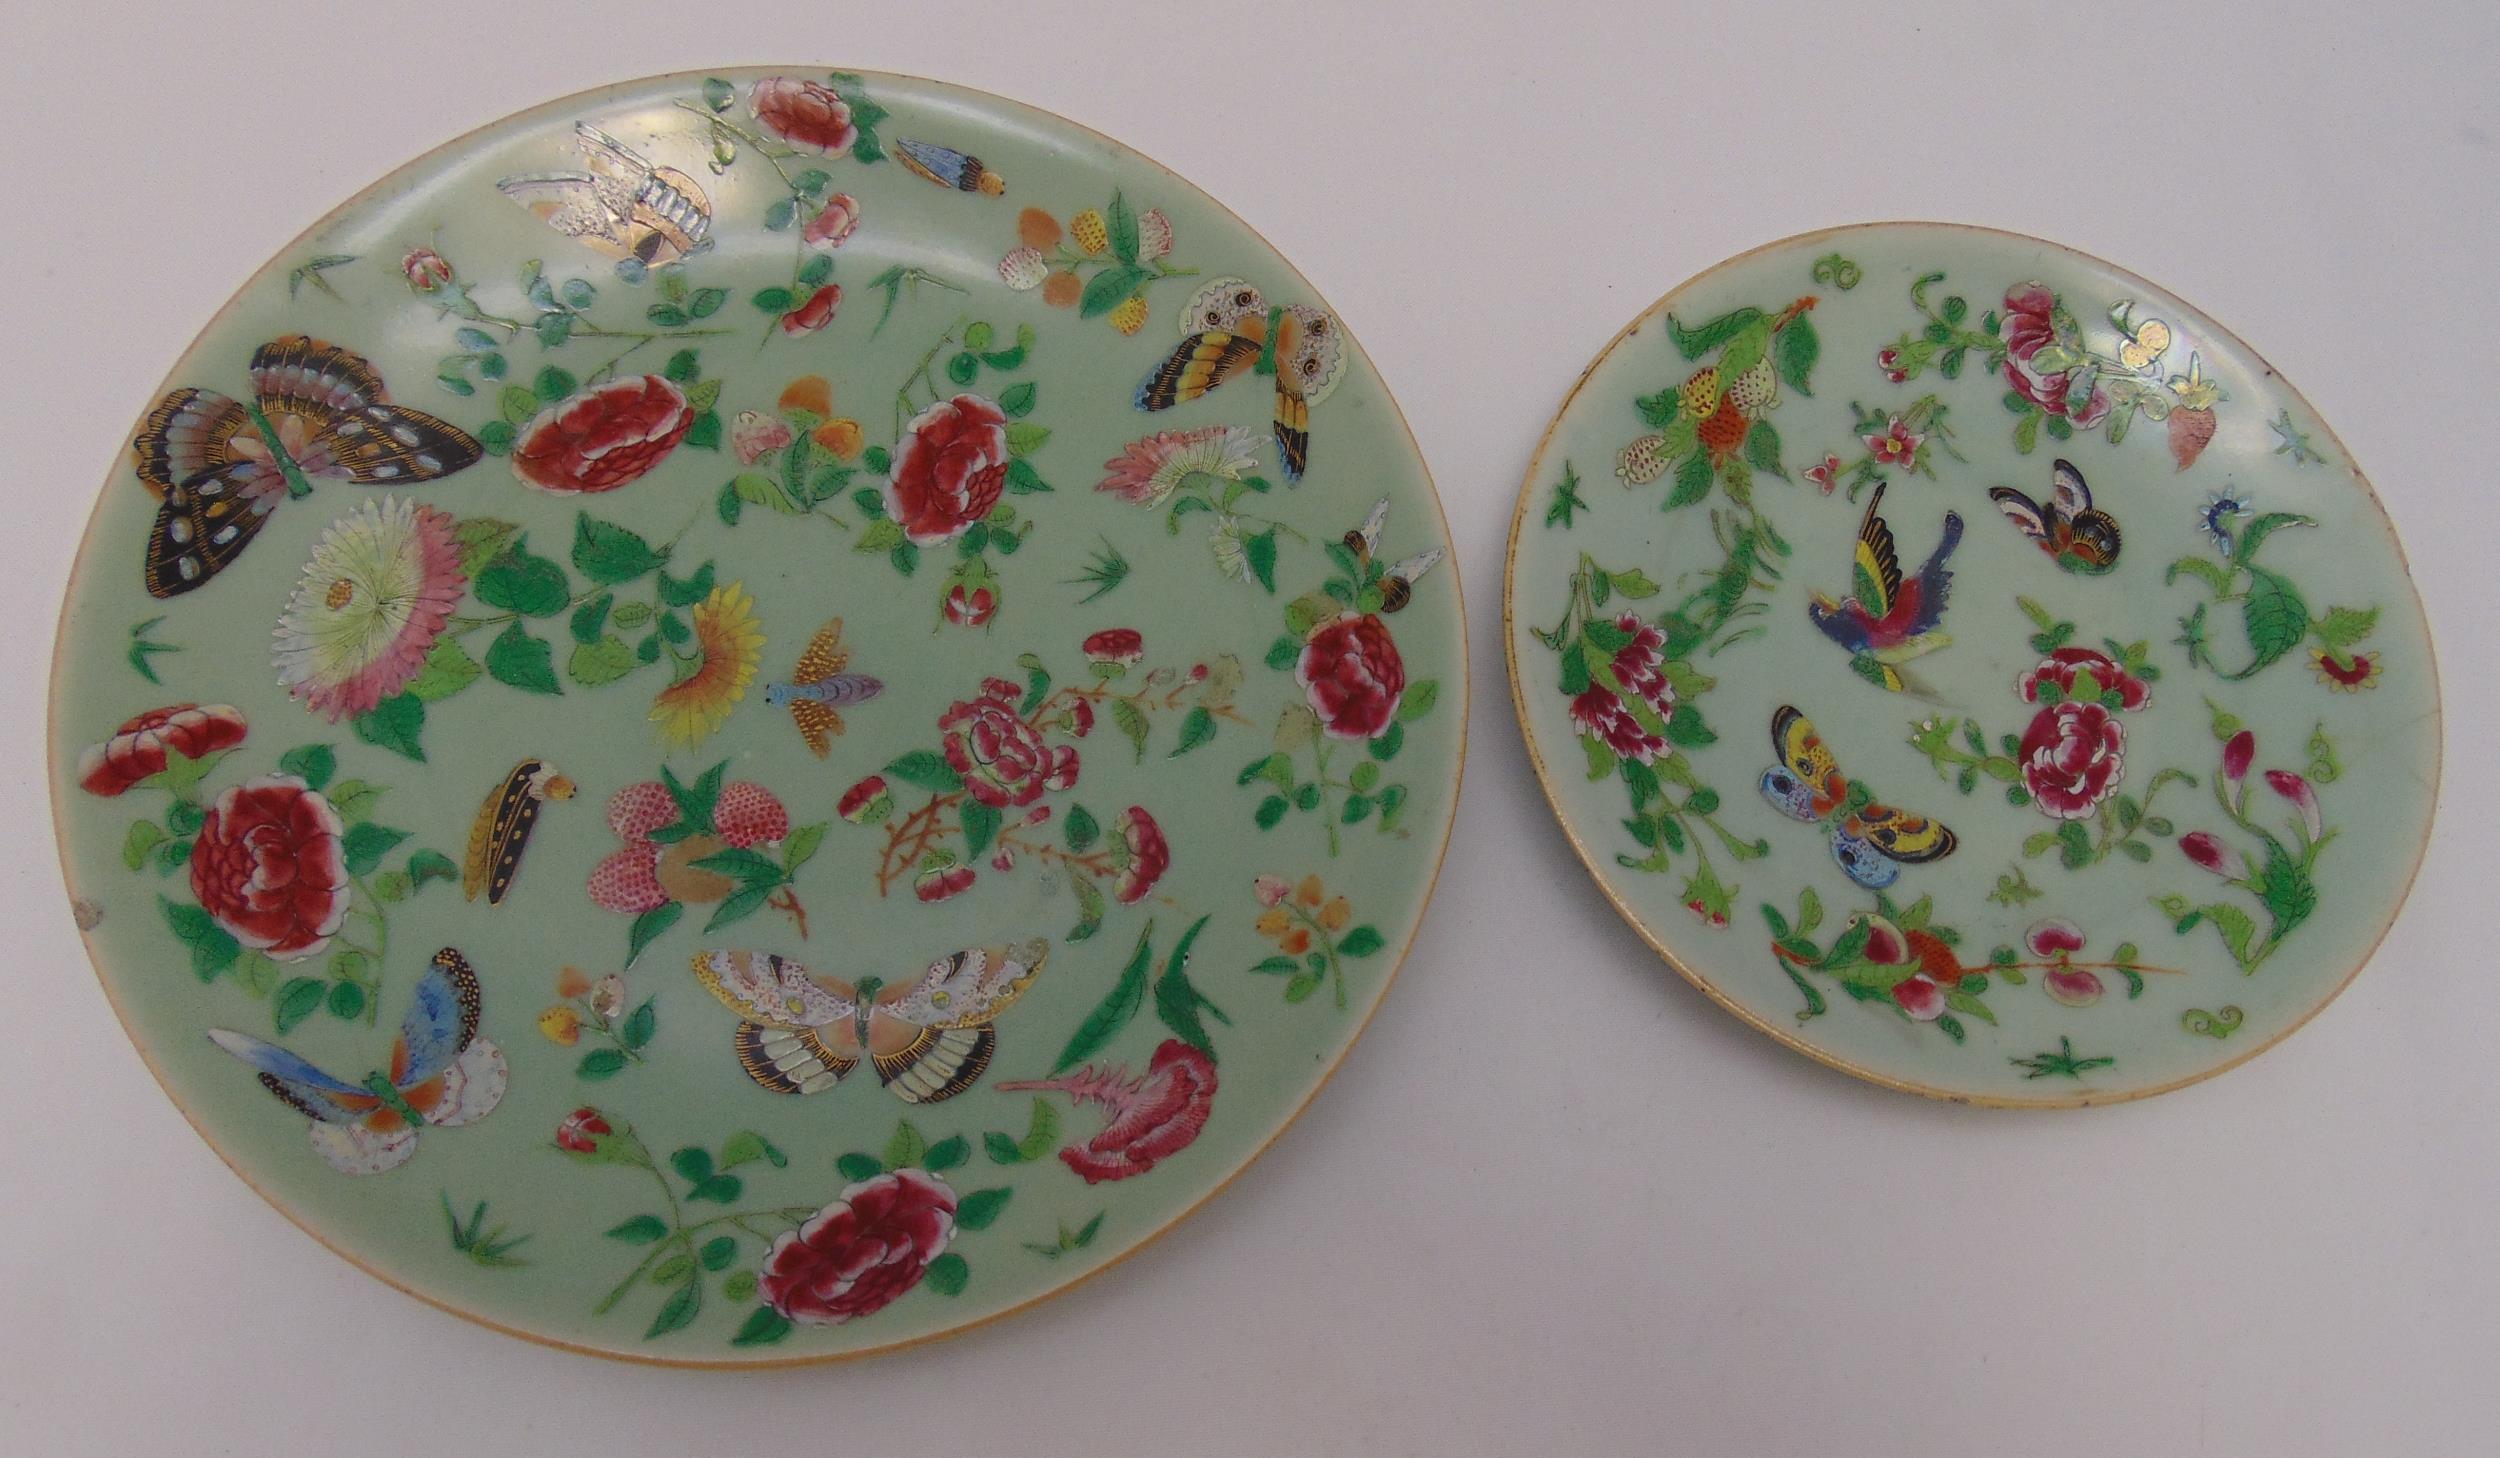 A late 19th century Chinese Famille Rose plate decorated with butterflies, flowers and leaves and